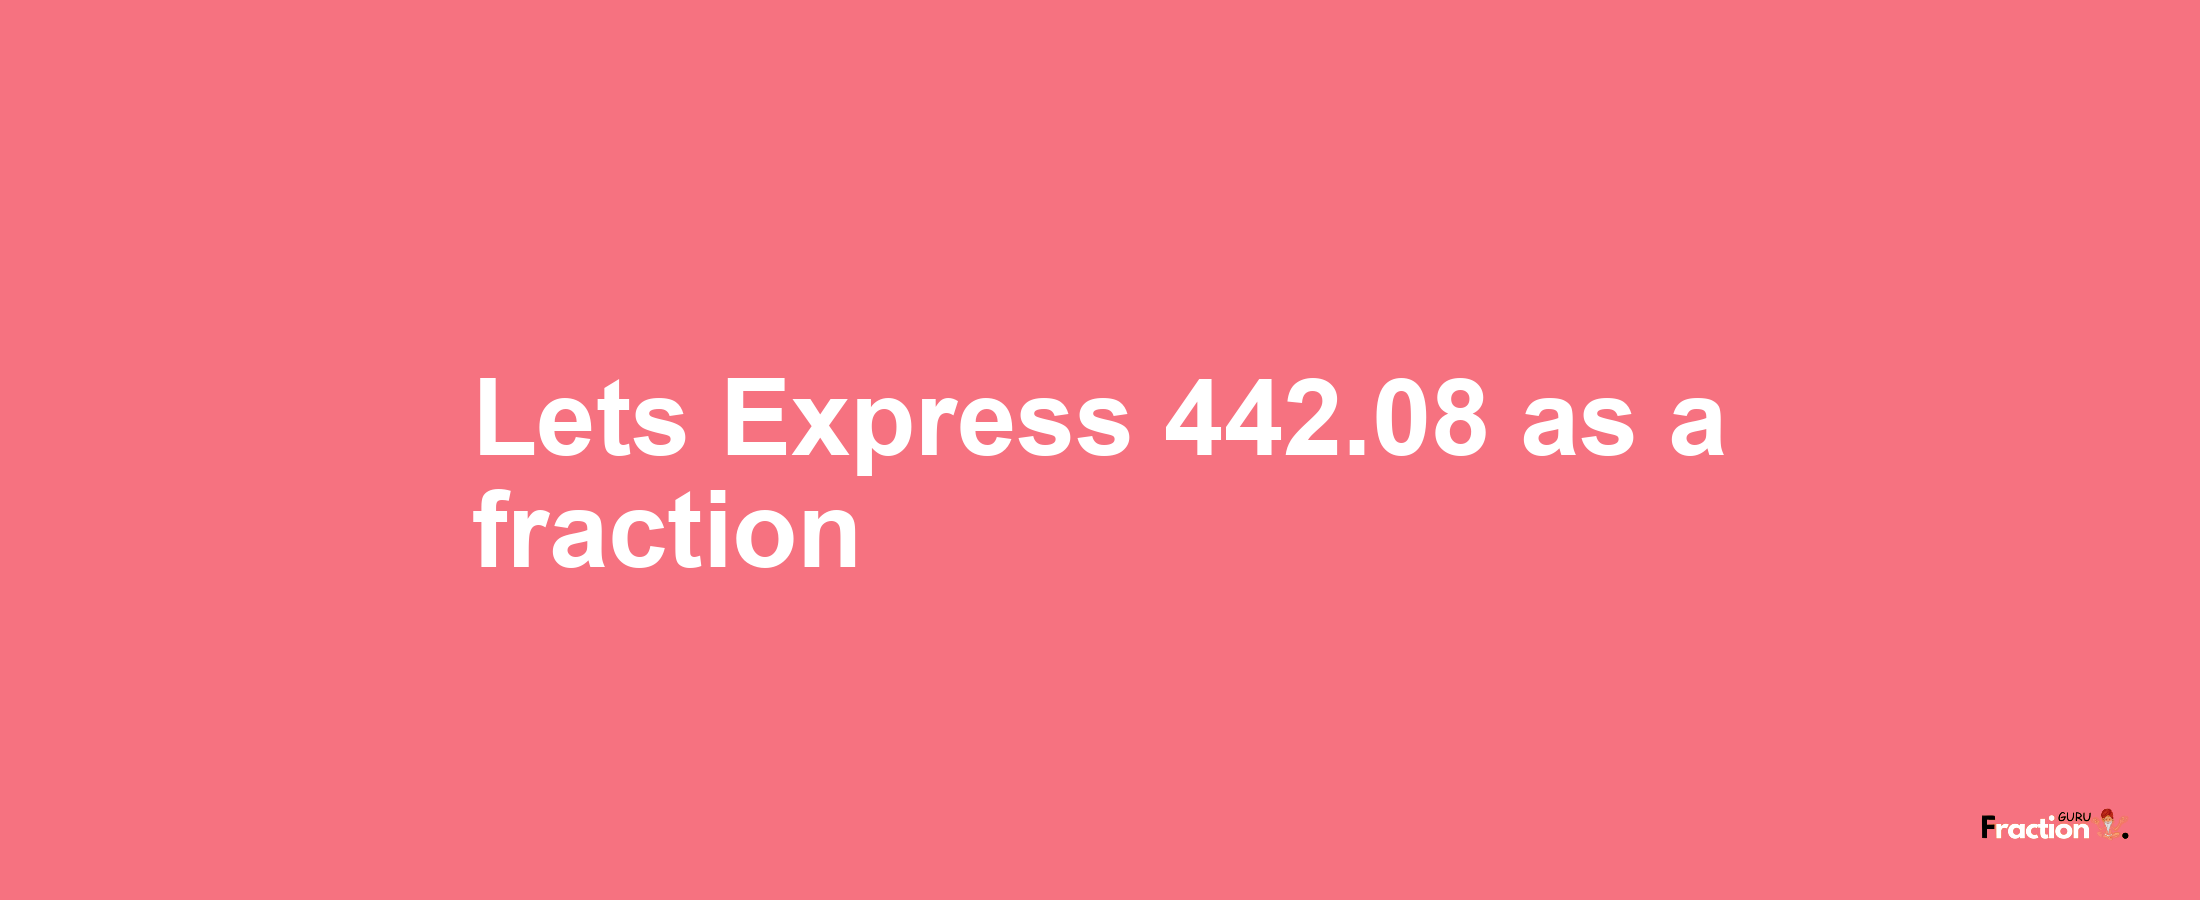 Lets Express 442.08 as afraction